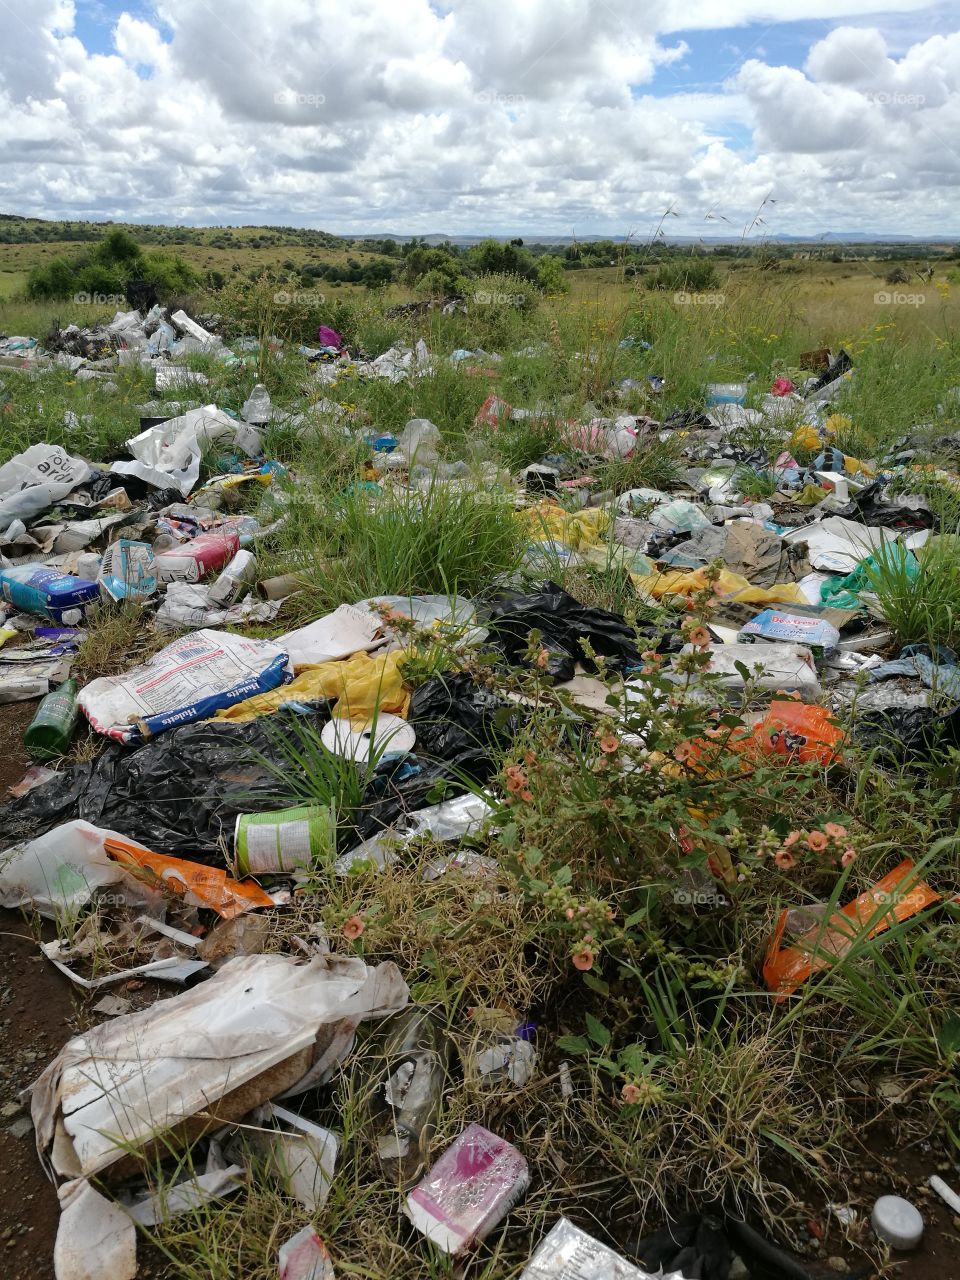 Illegal dumping, heavy footprint of humans on the earth.